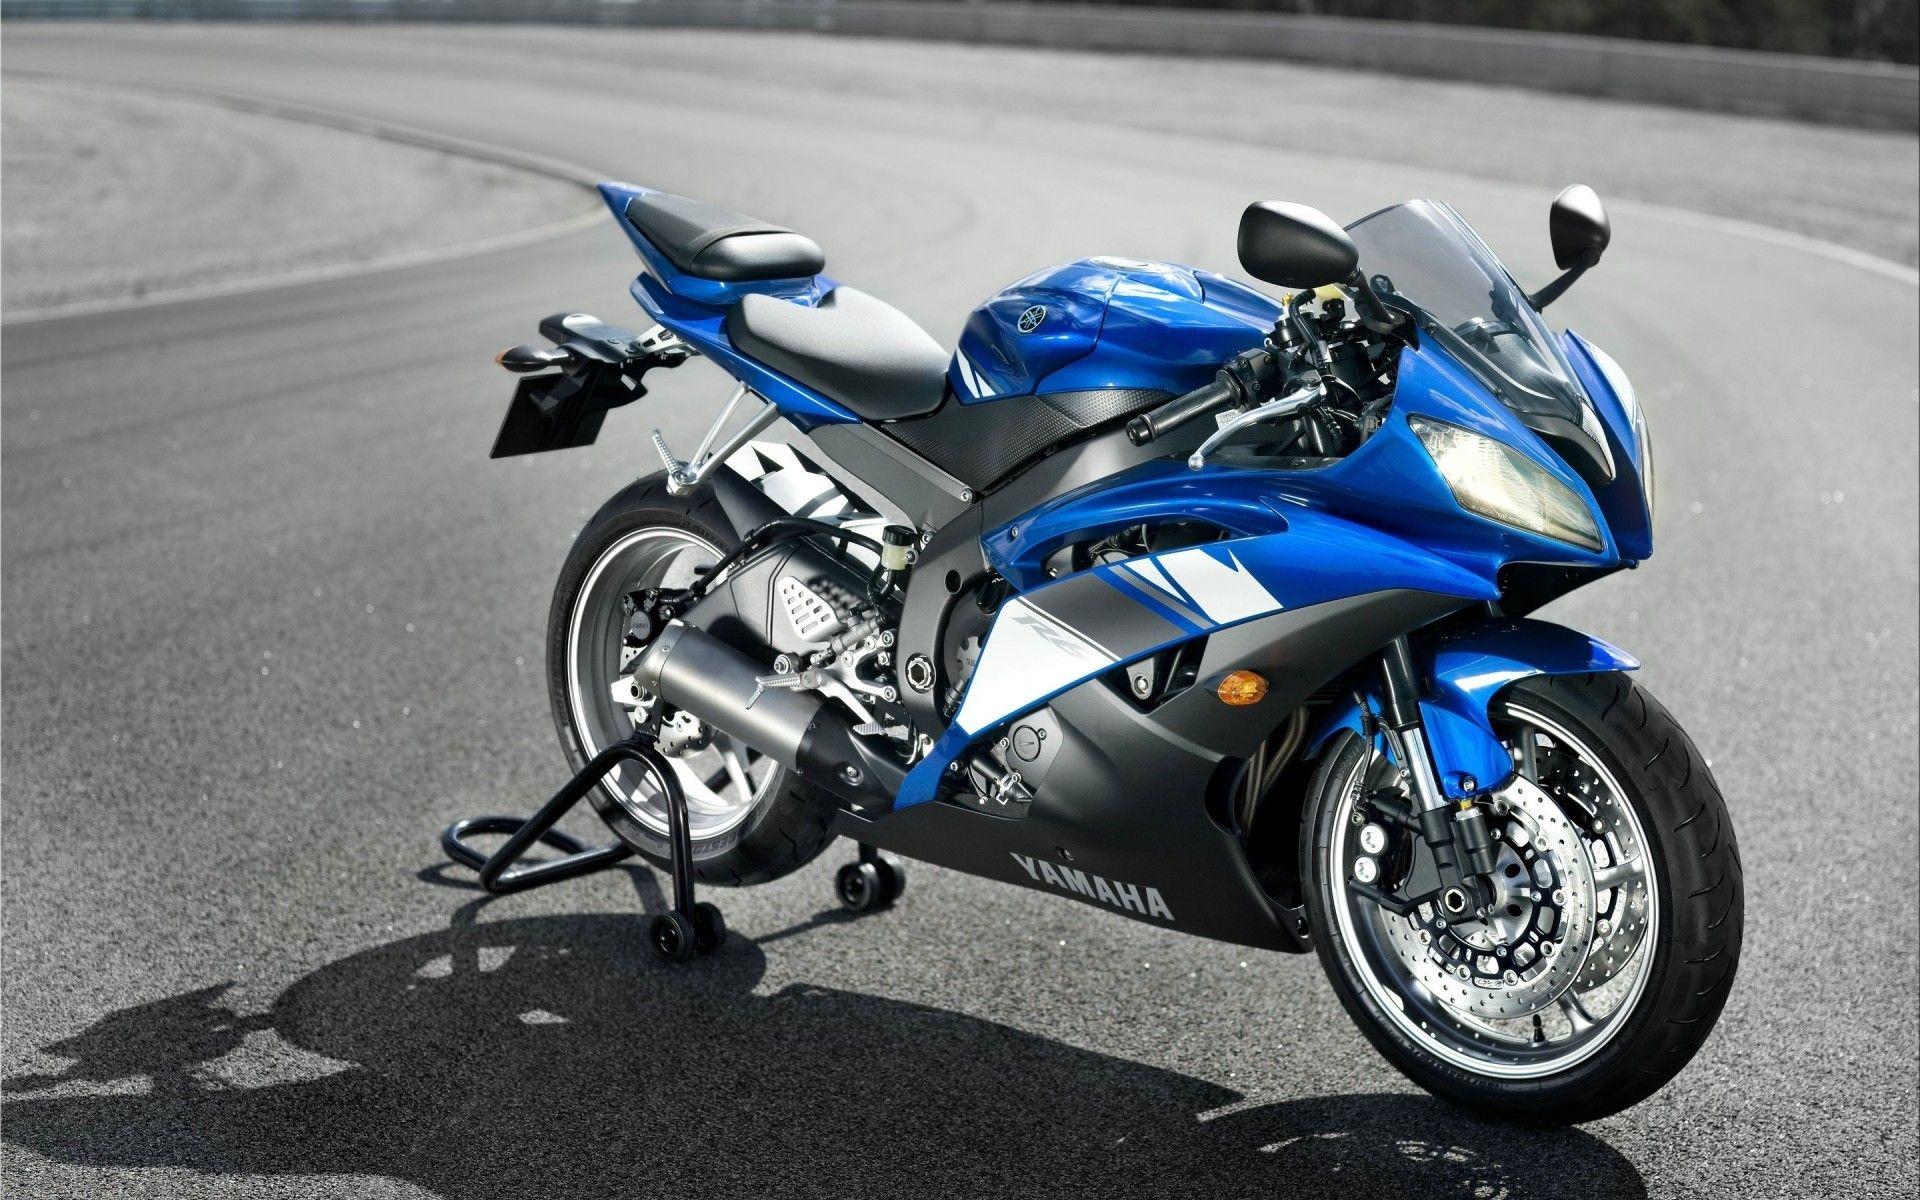 Blue Yamaha R6. Android wallpaper for free